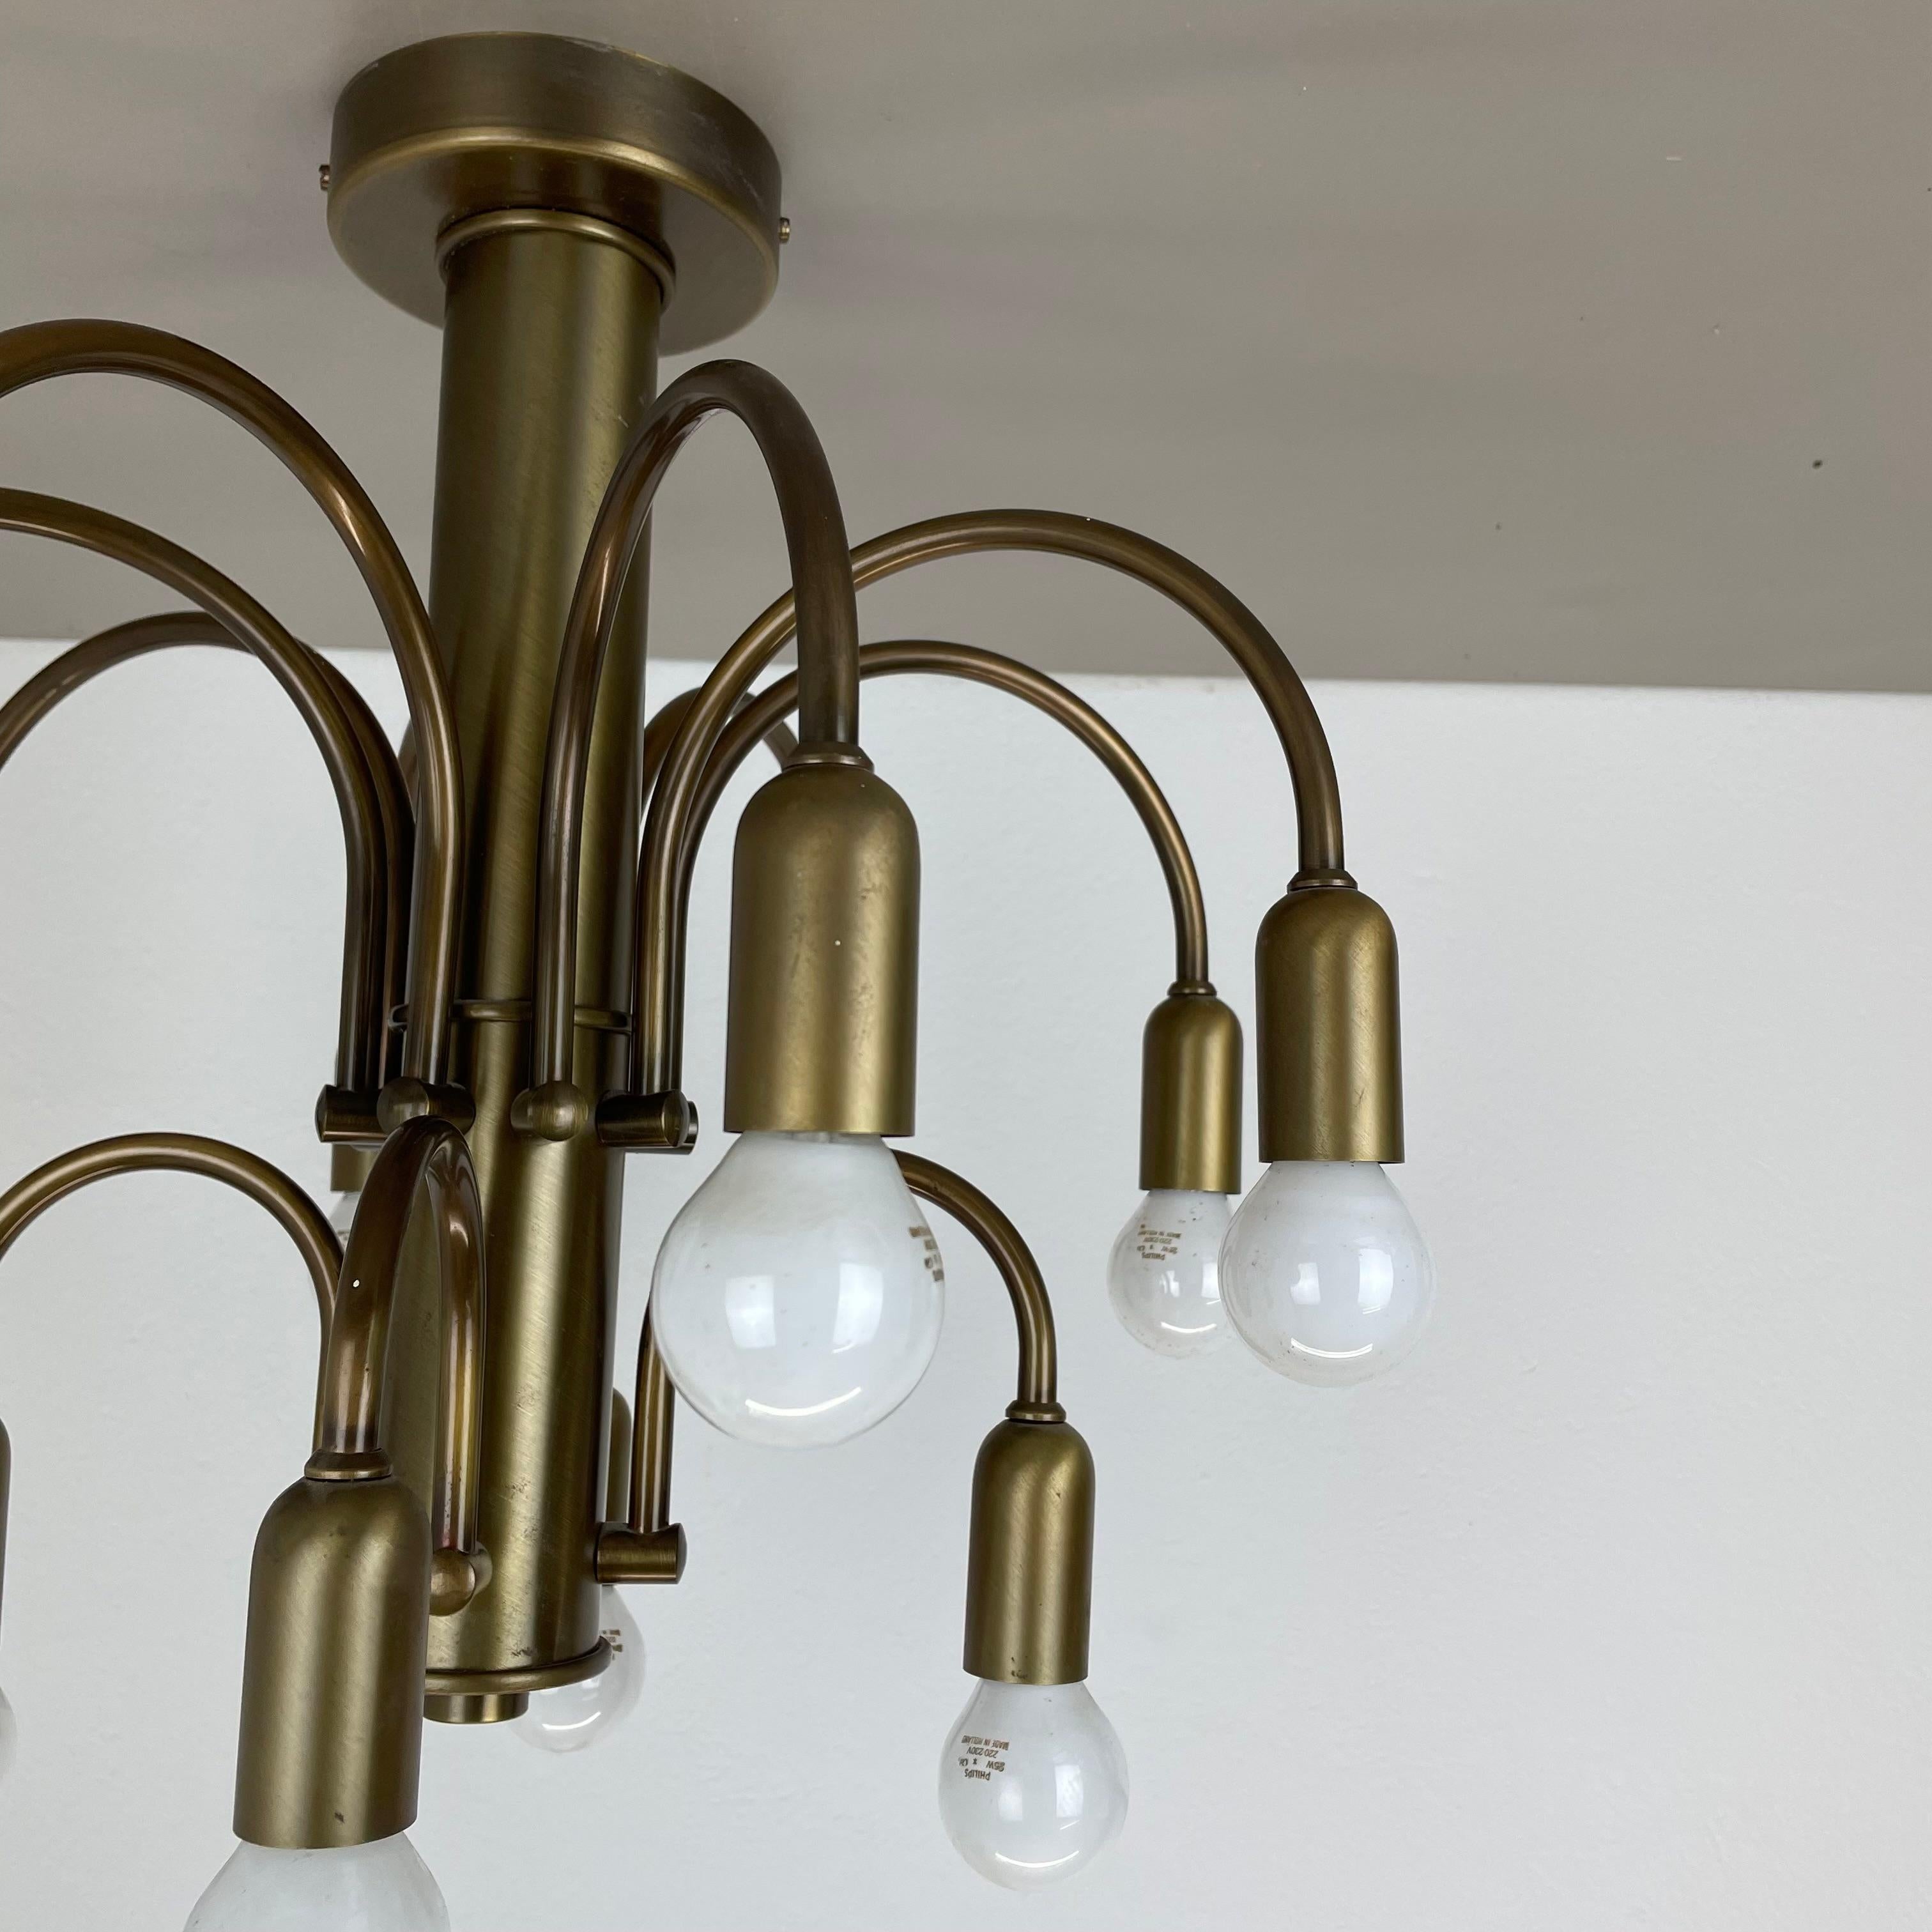 20th Century large 12-armed solid Brass ceiling light Chandelier by WKR Lights, Germany 1970s For Sale